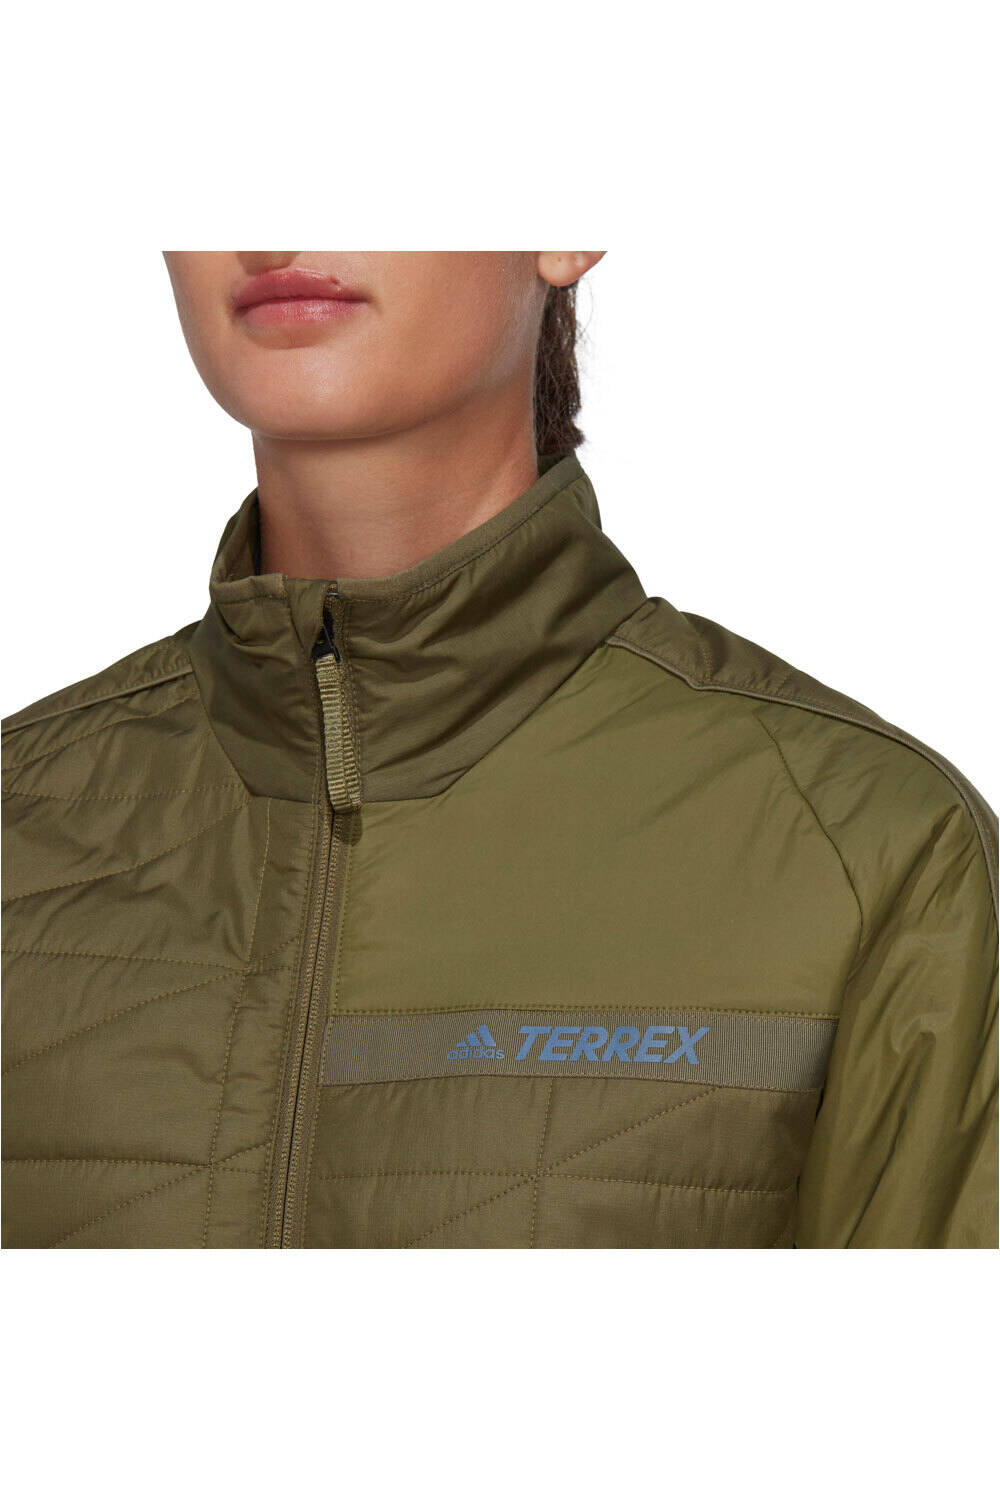 adidas chaqueta outdoor mujer Terrex Multi Synthetic Insulated 04